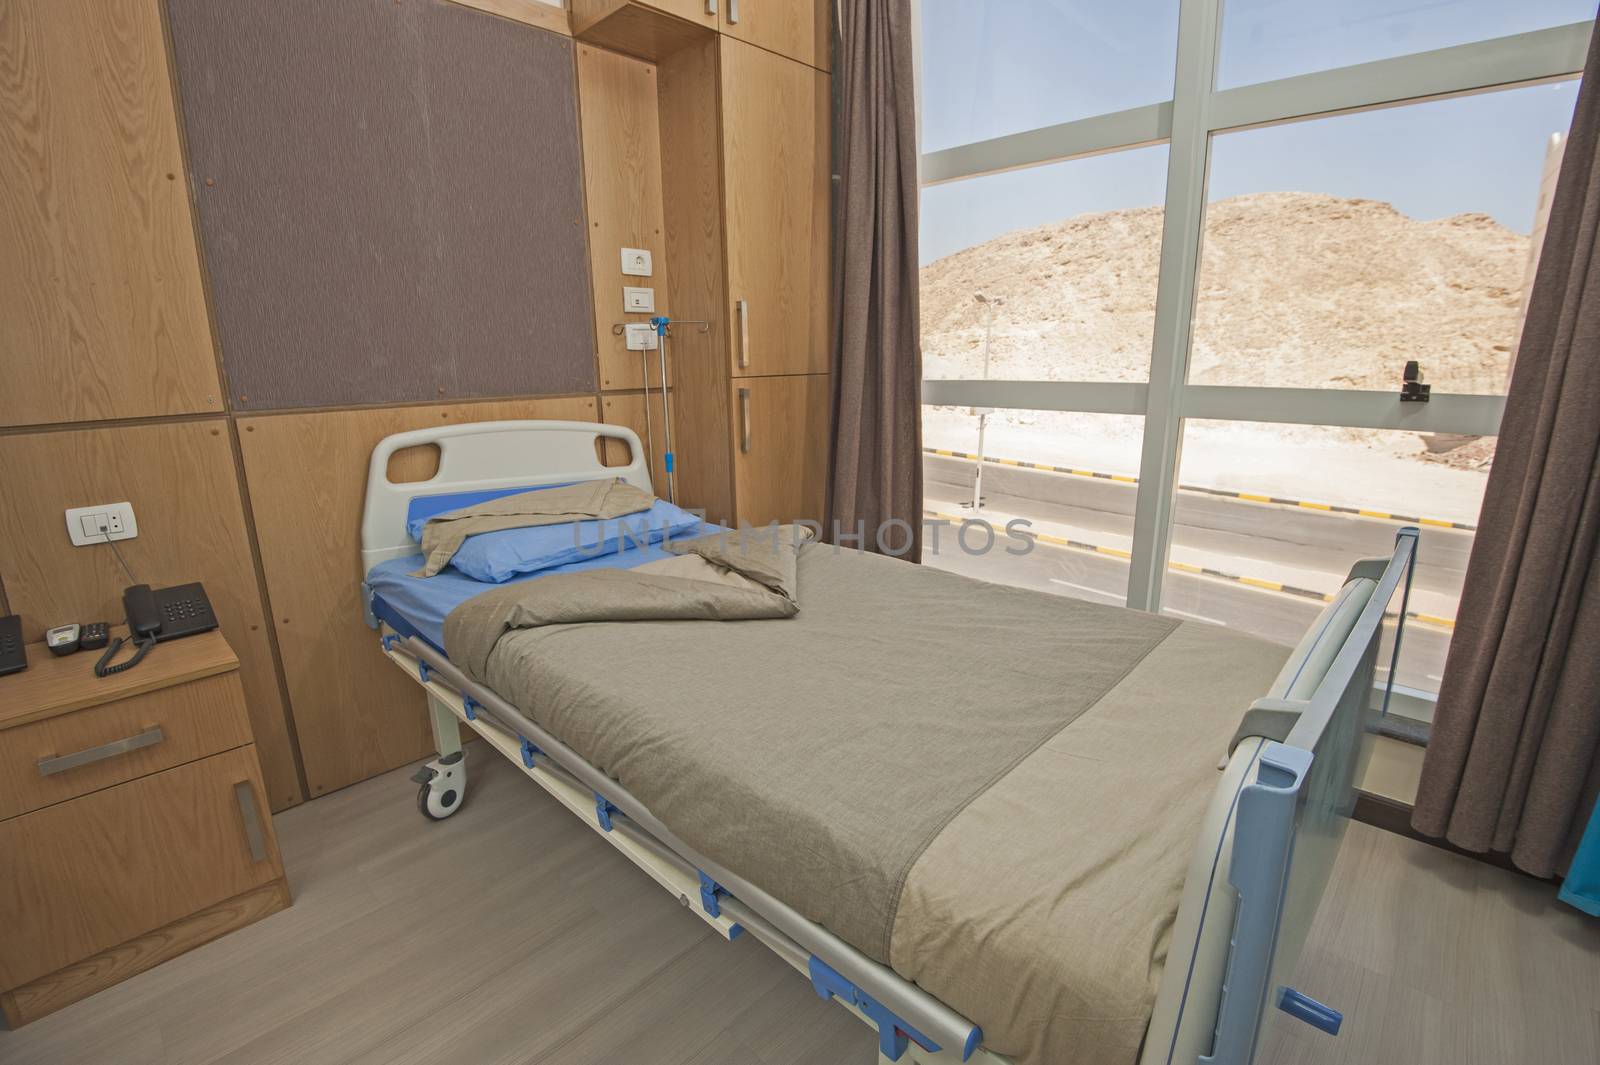 Hospital bed in a private hospital ward